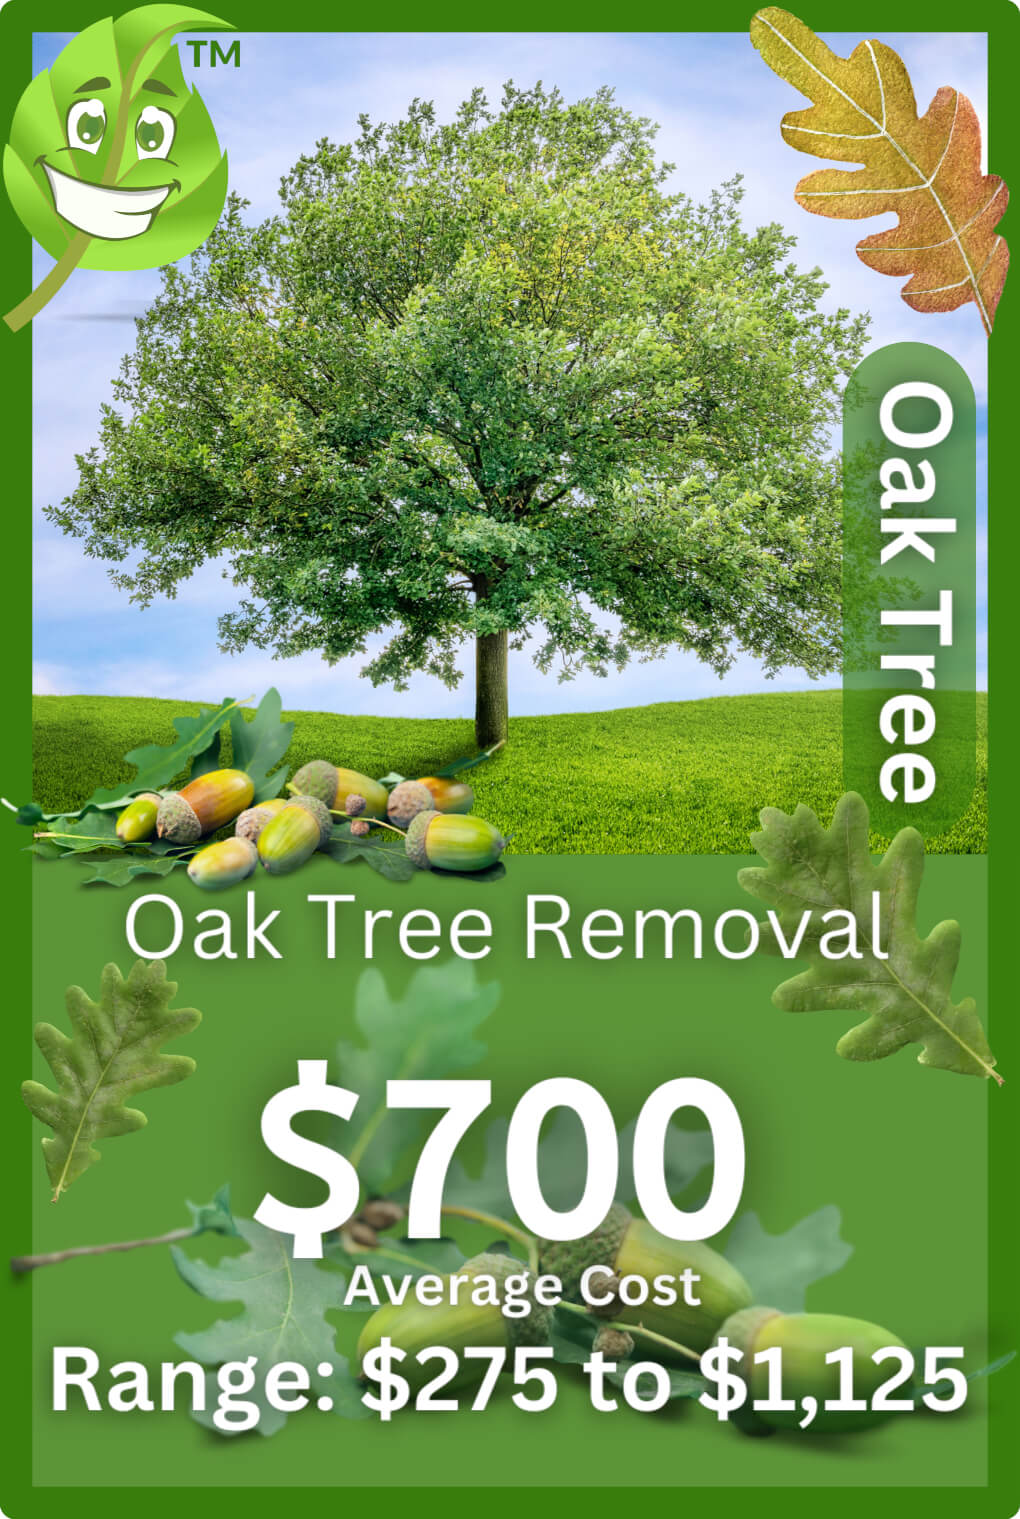 Oak Tree Removal Cost Infographic